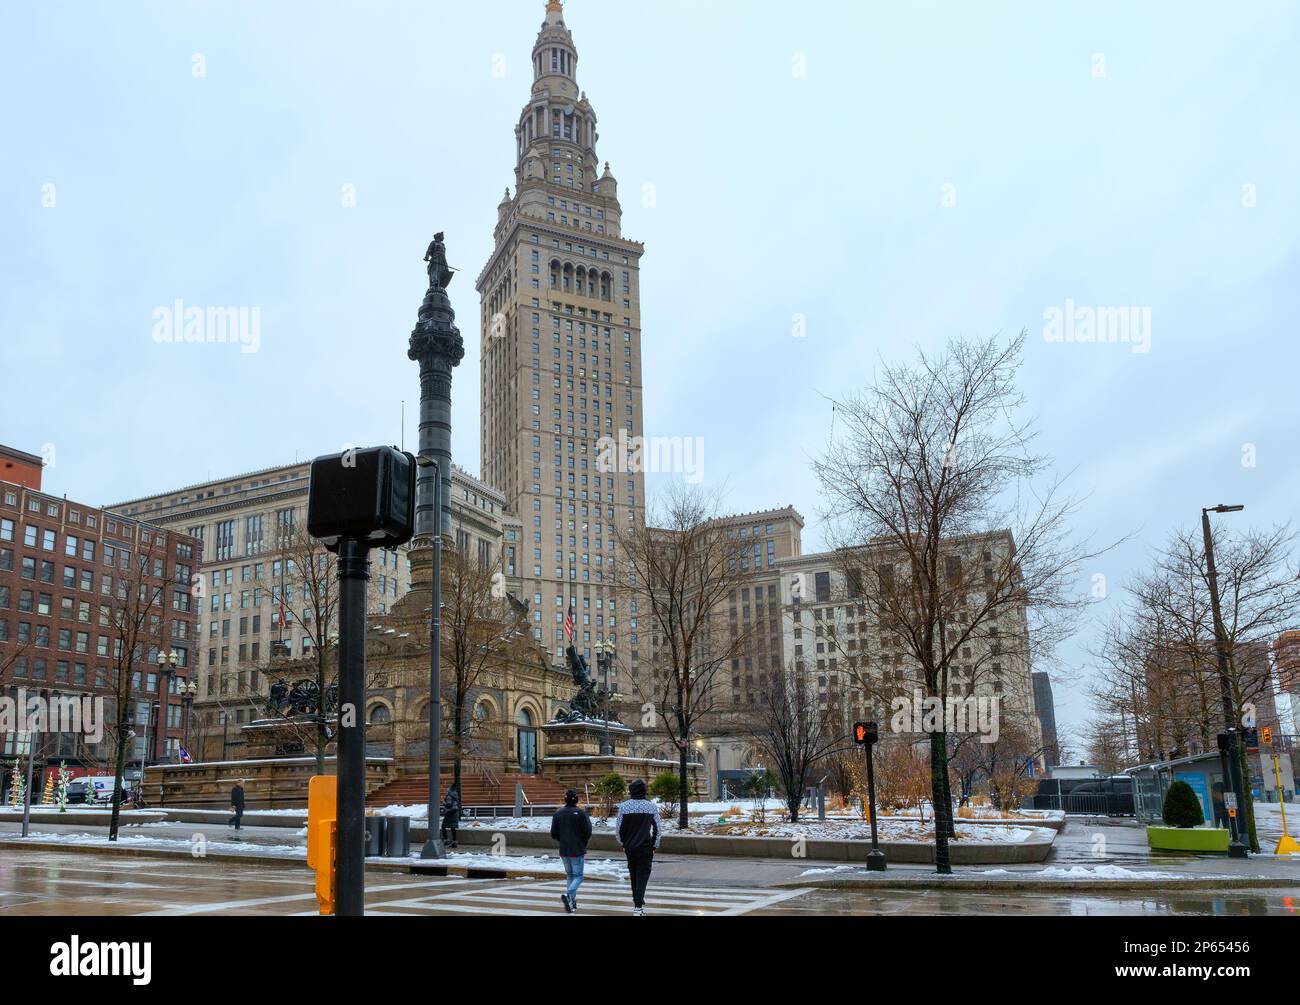 Cleveland, Ohio, USA - January 25, 2023:  Few people out on this cold winter day in downtown districk near Veterans' Memorial Plaza. Stock Photo